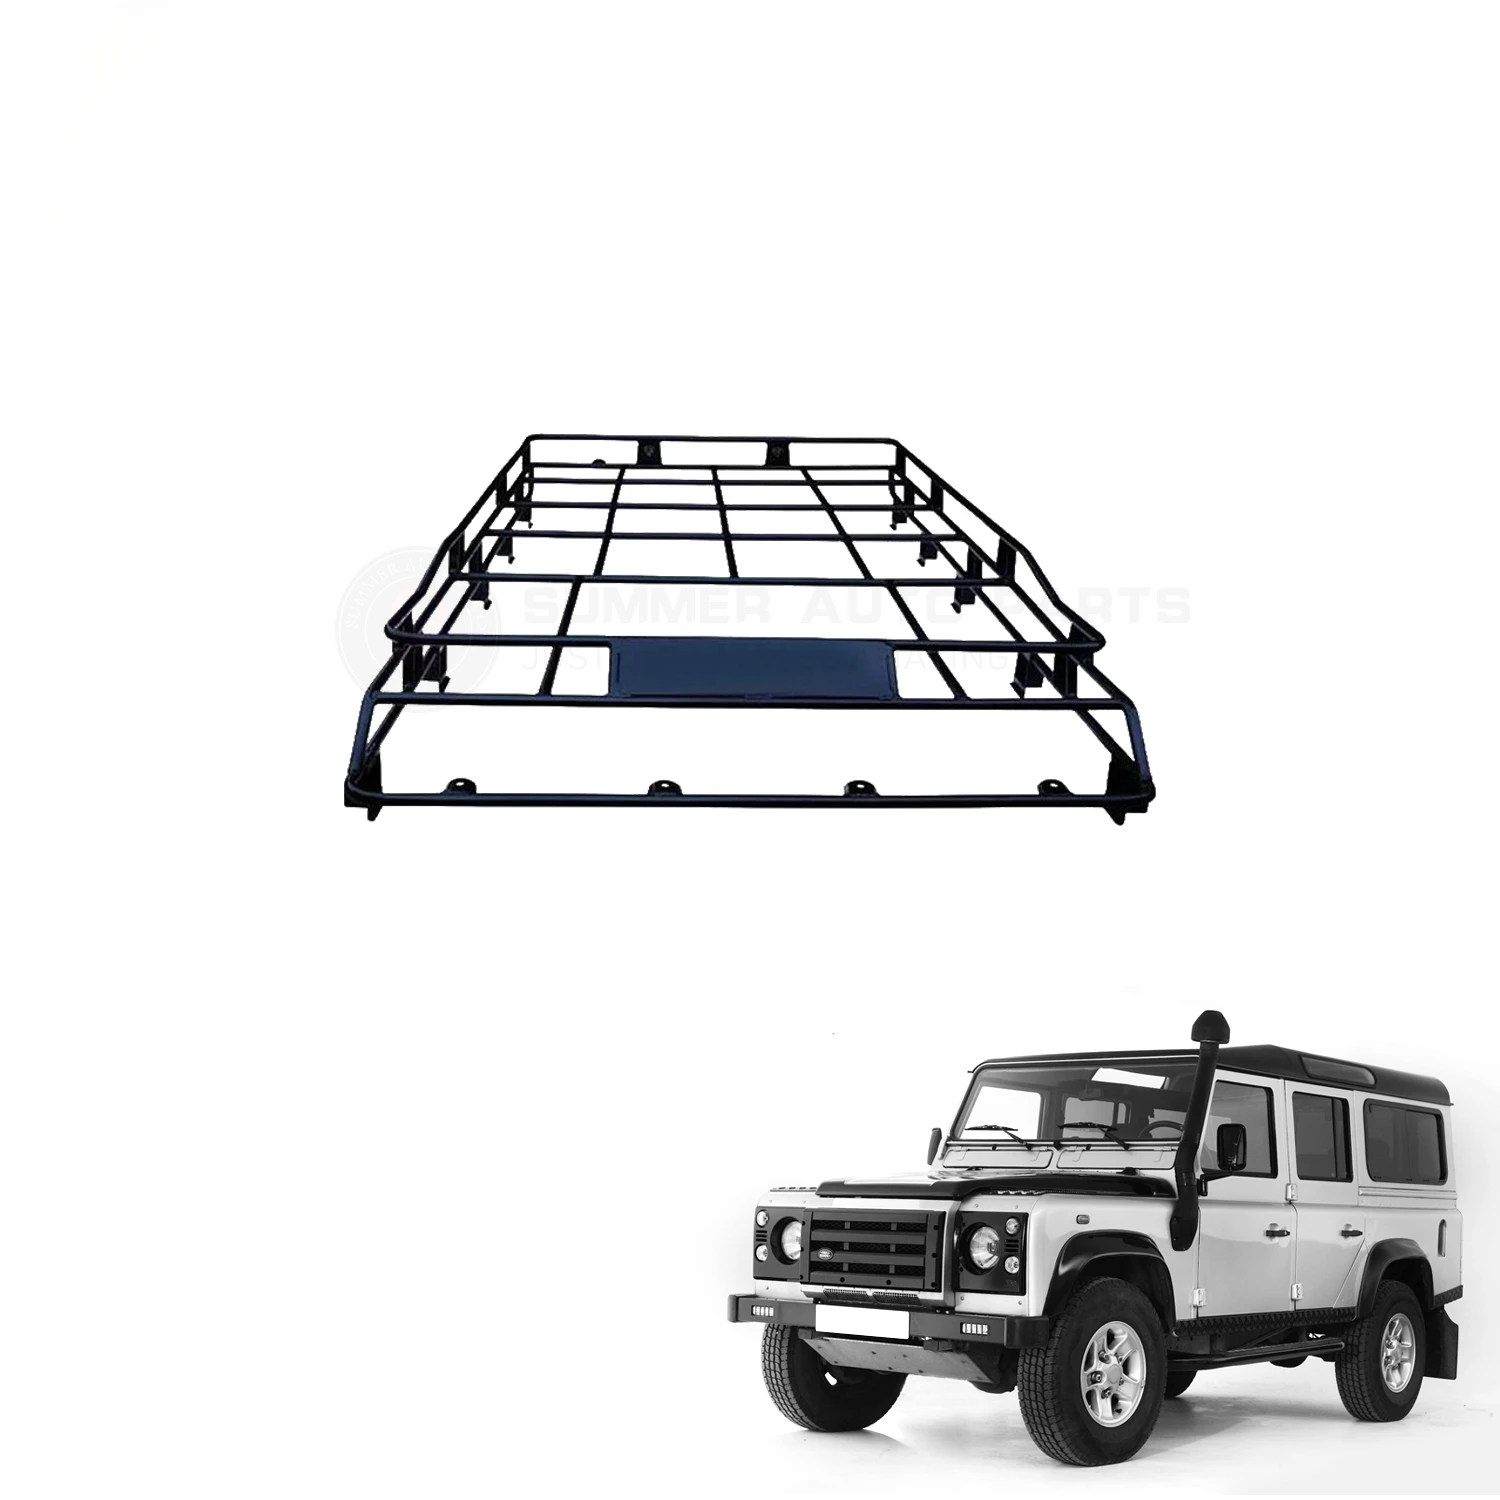 DEF4X4 Luggage Roof Rack Exterior Accessories For Classic Defendercustom motorcycle elastics rubber luggage rope cord hooks bikes rope tie auto luggage roof rack strap fixed band hook car accessories